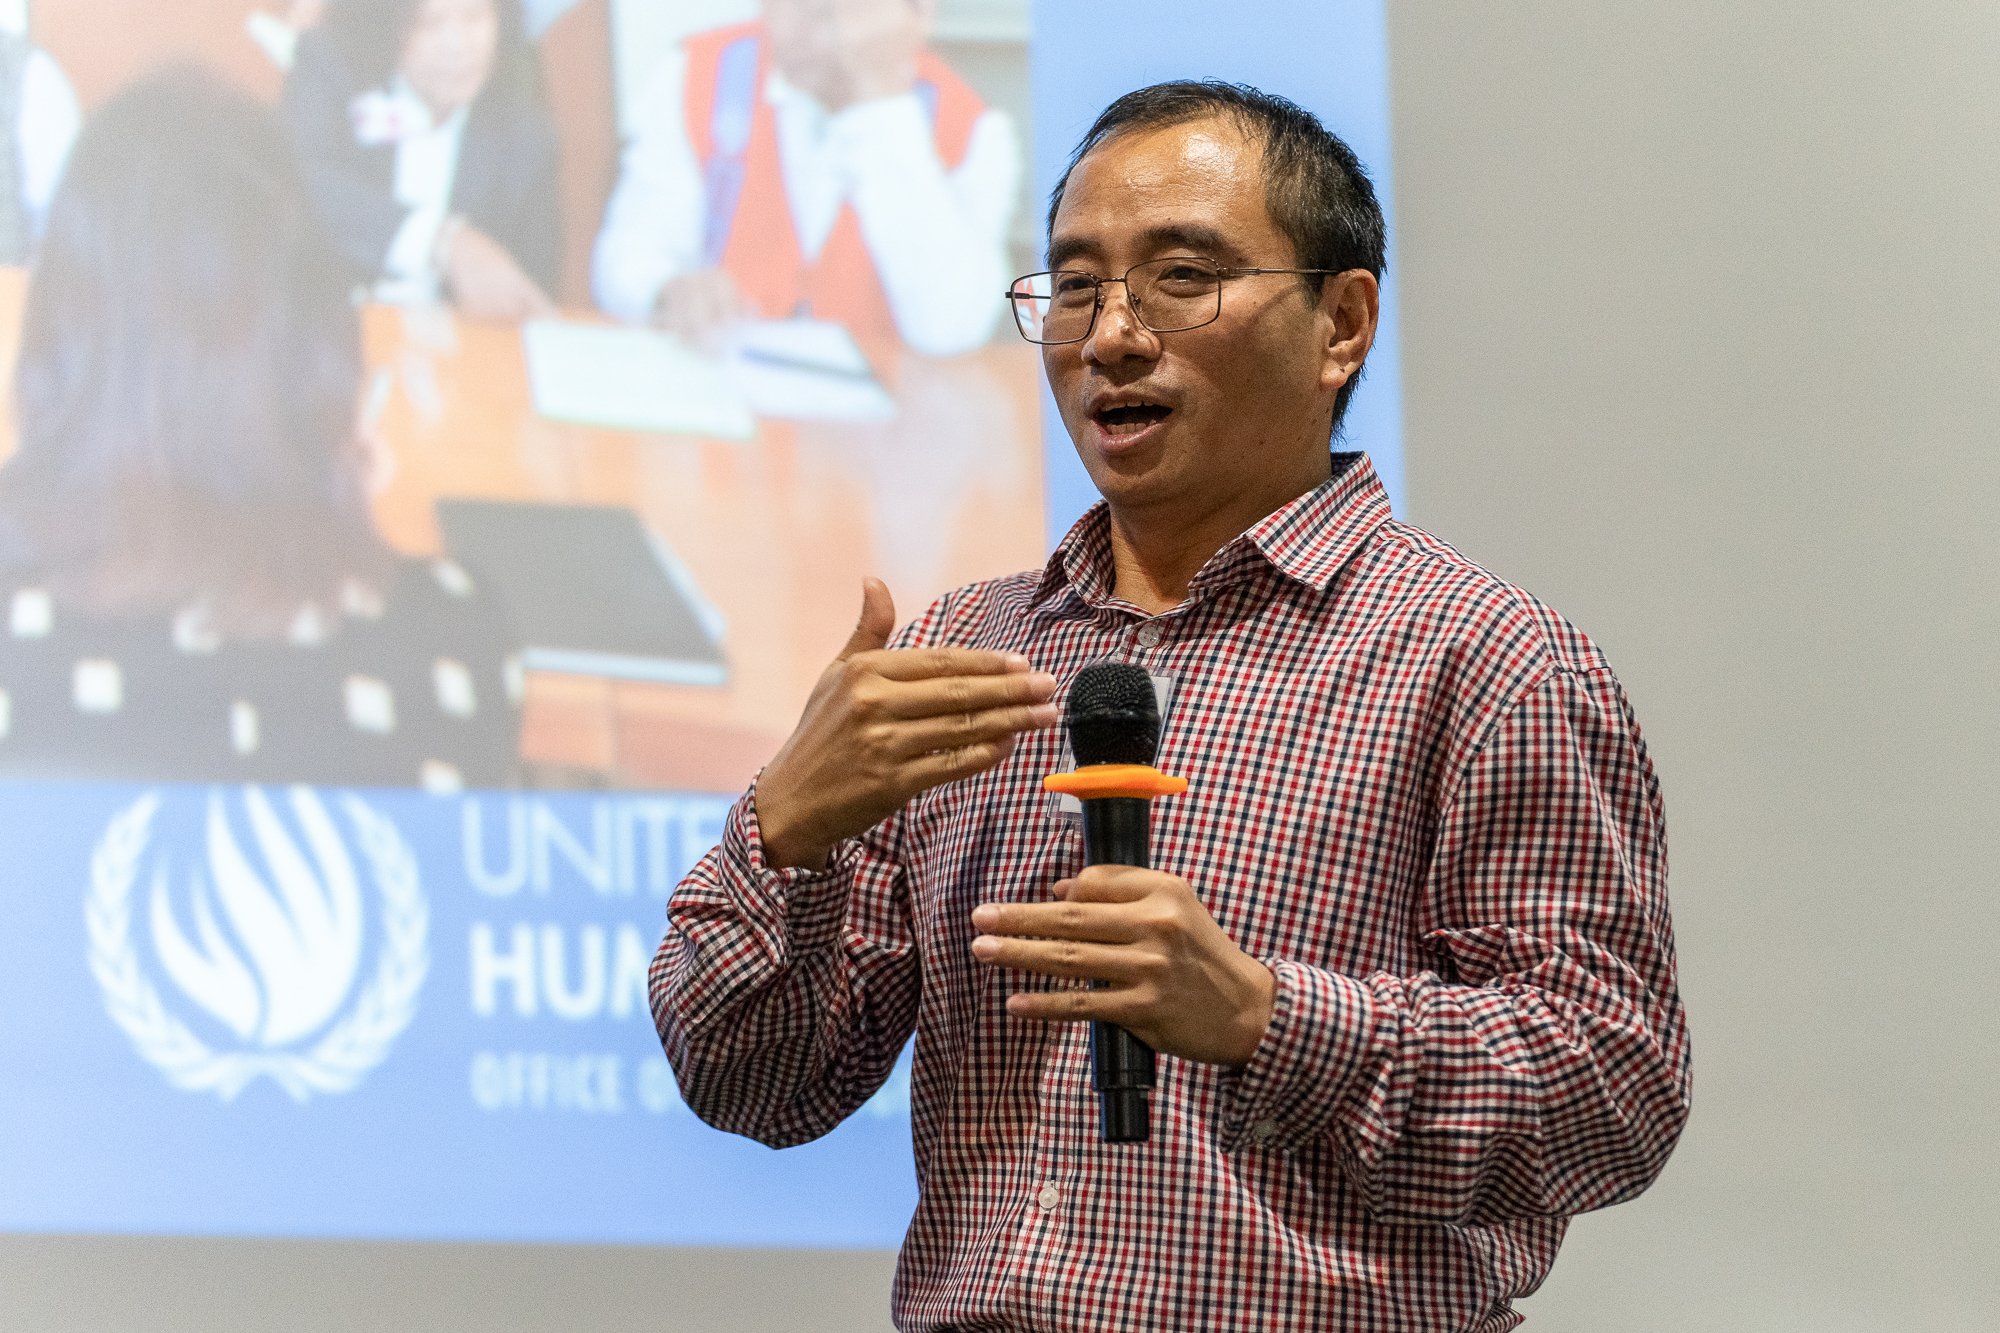 A male UN staff member presents during a YECAP training session